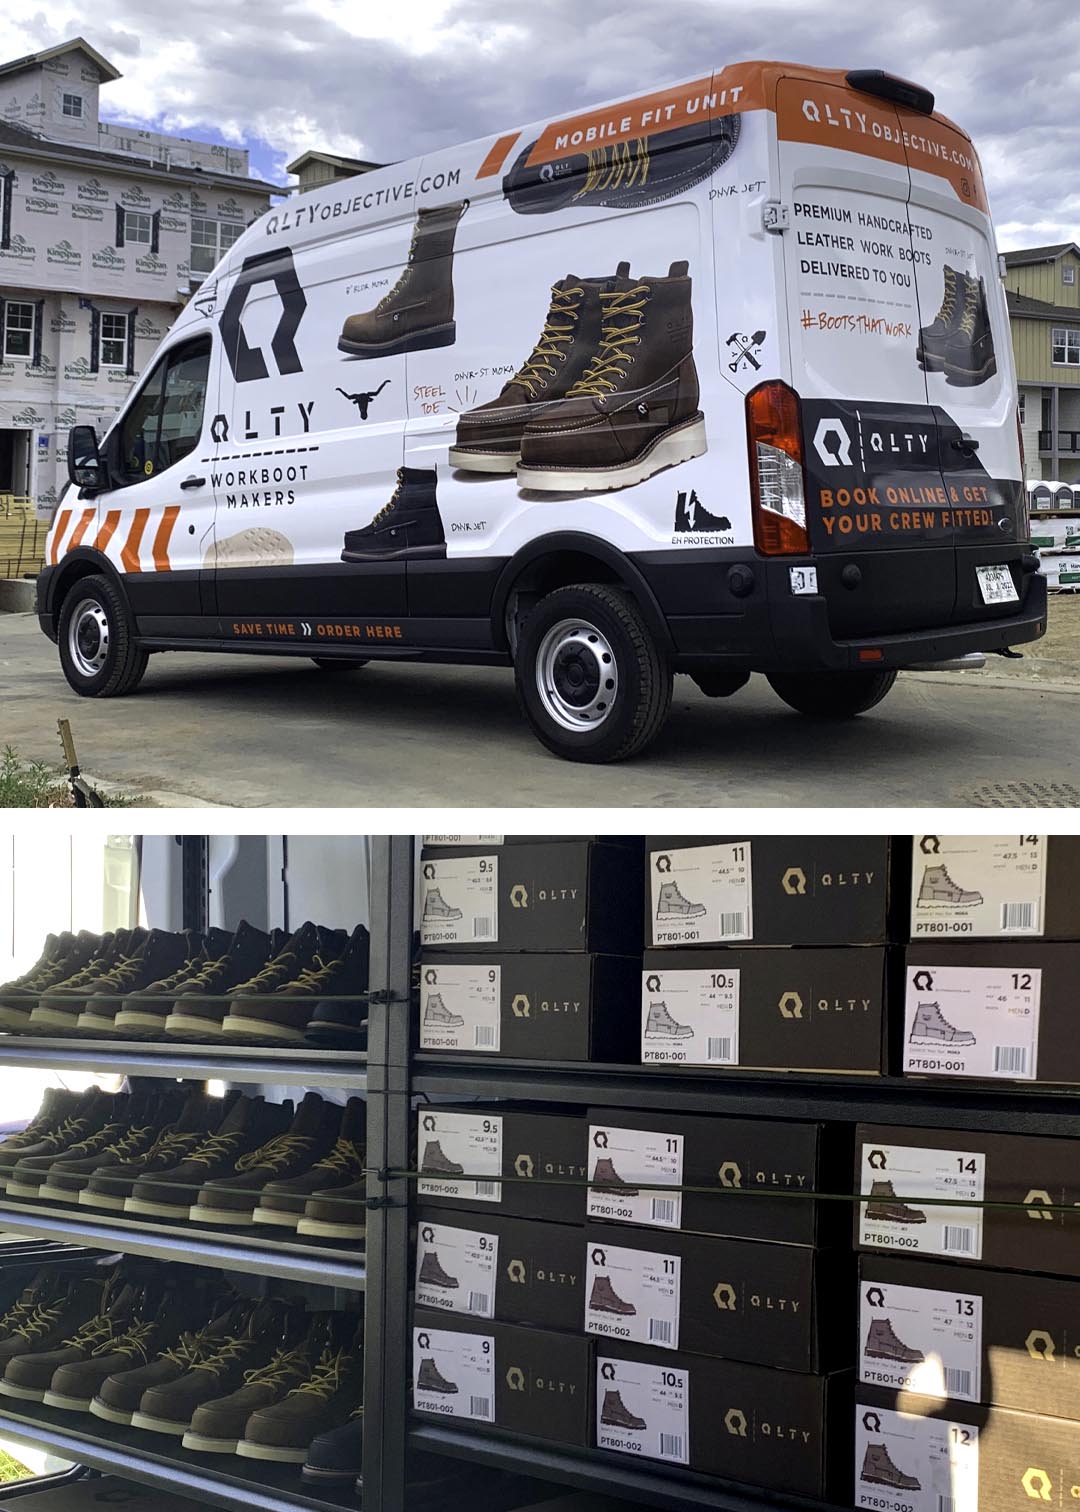 qlty quality mobile fit unit for work boots is on the road in denver colorado